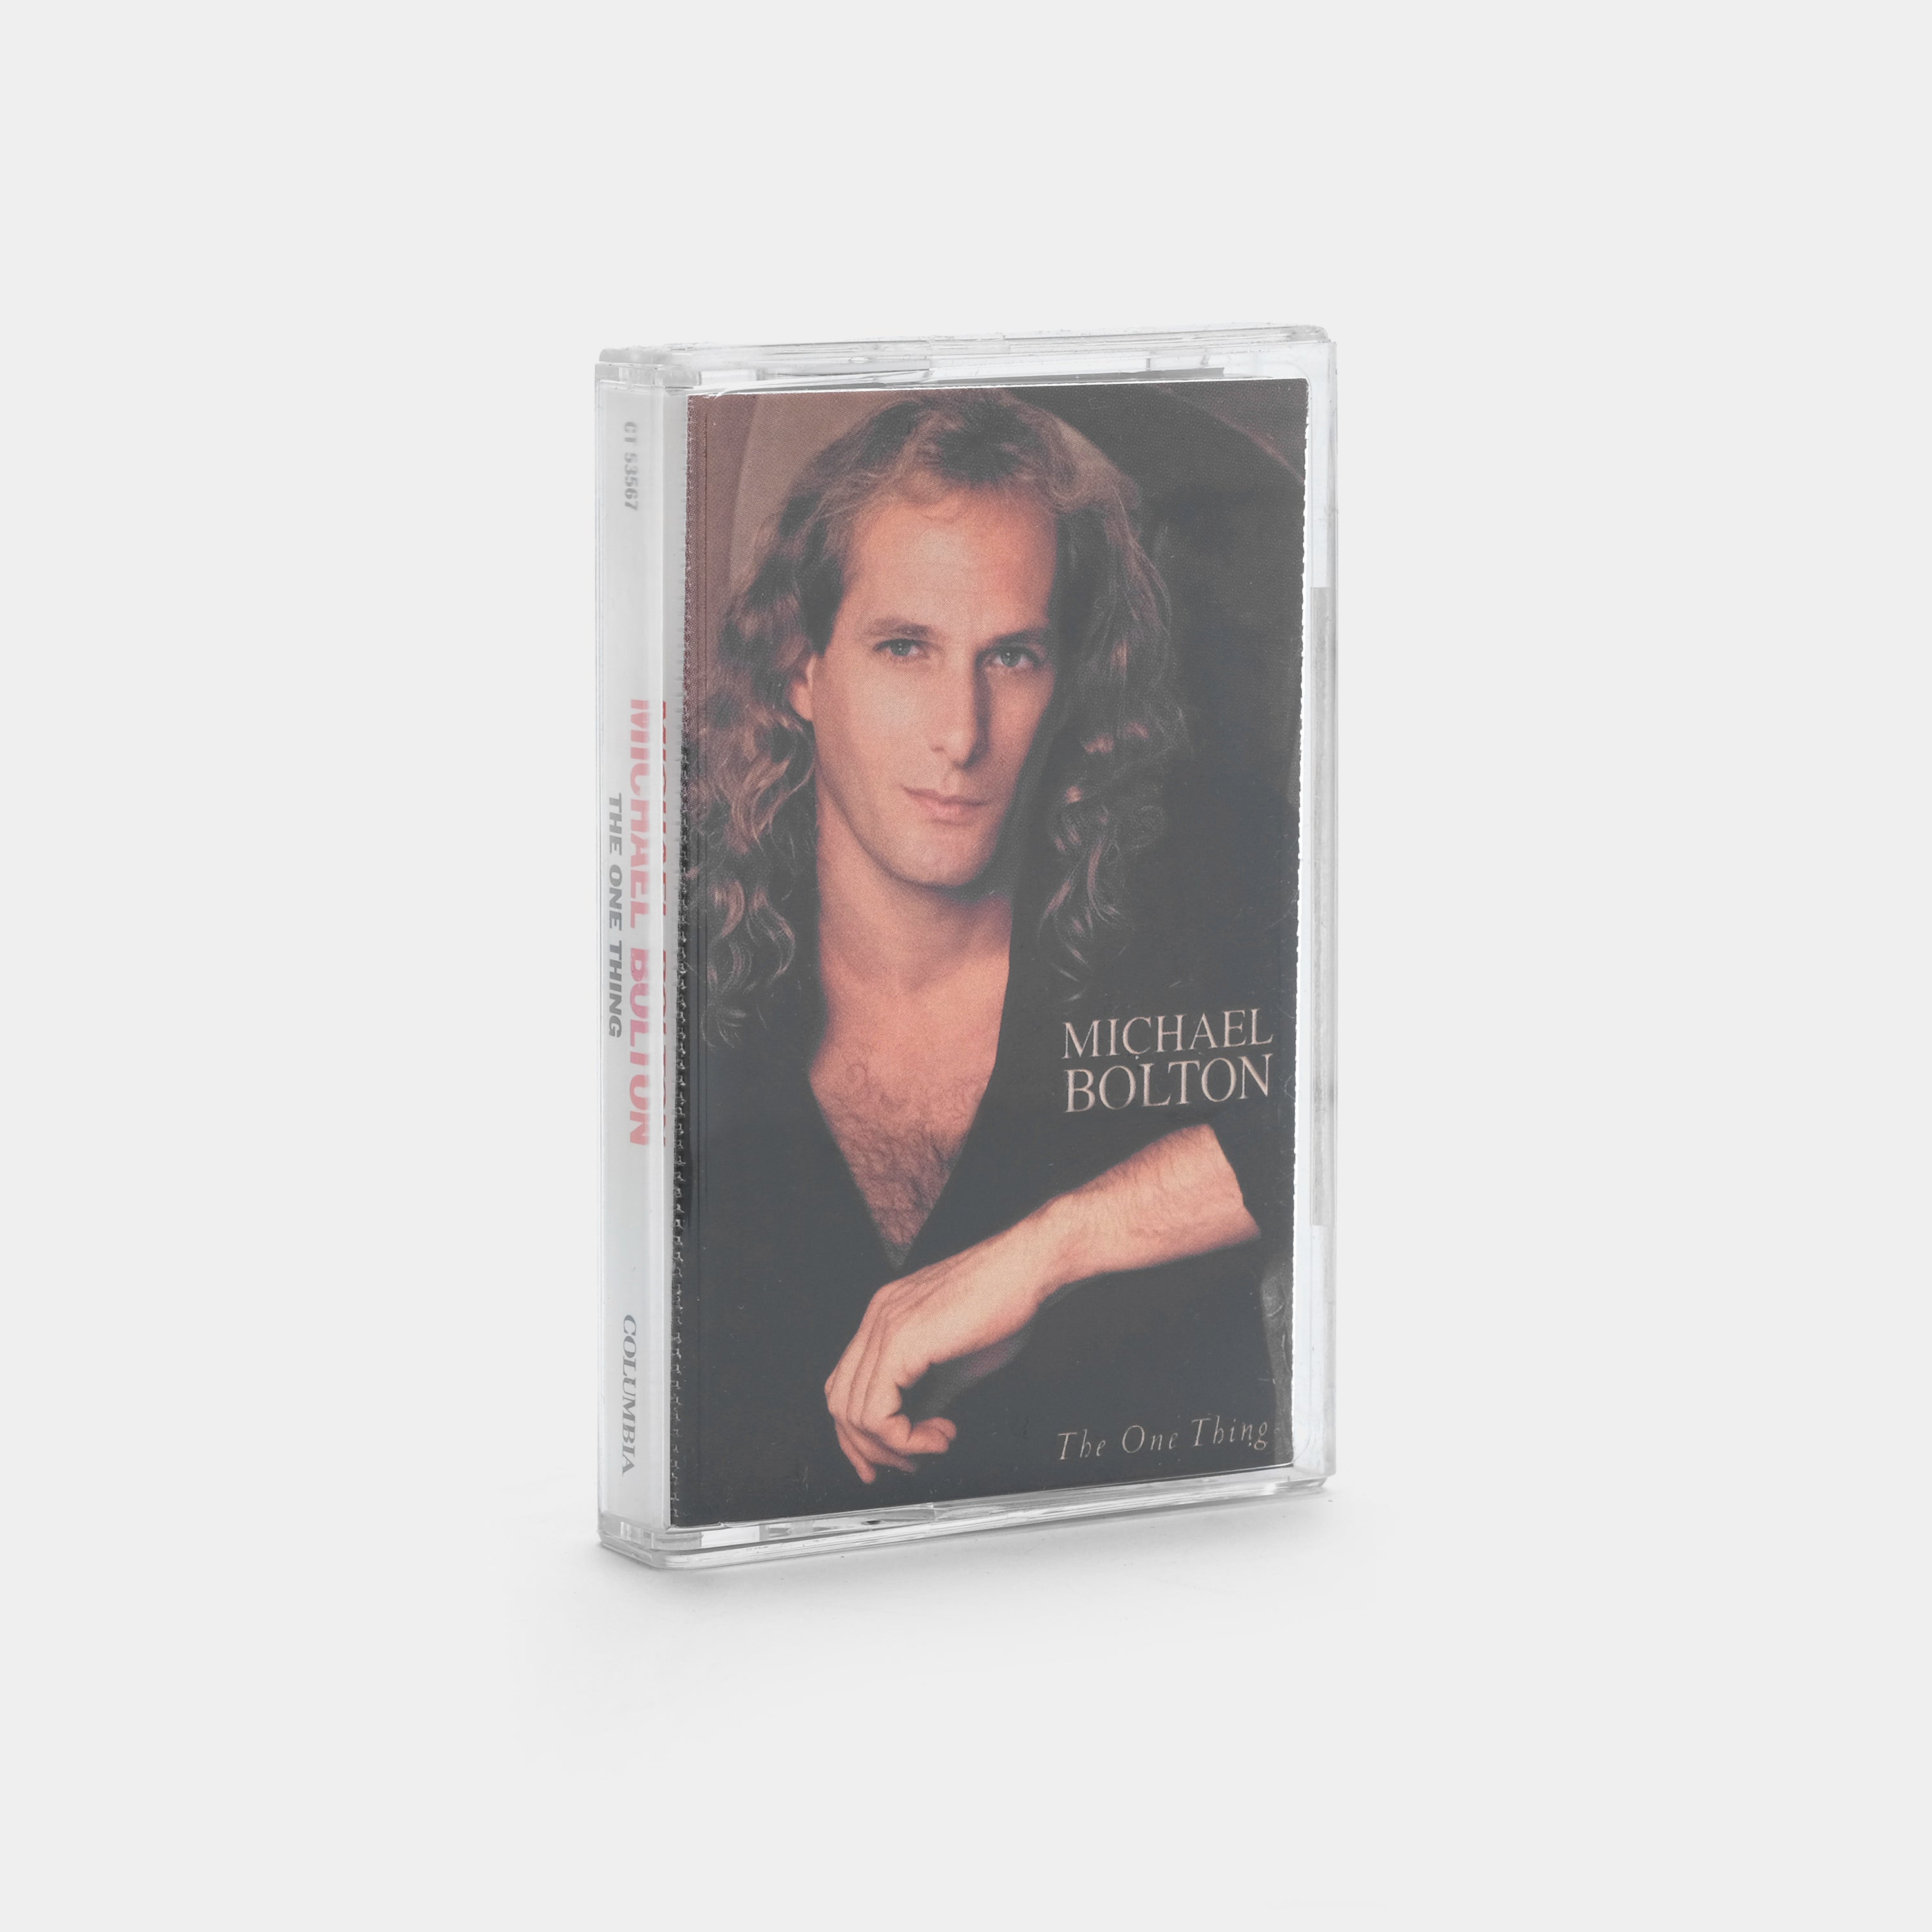 Michael Bolton - The One Thing Cassette Tape